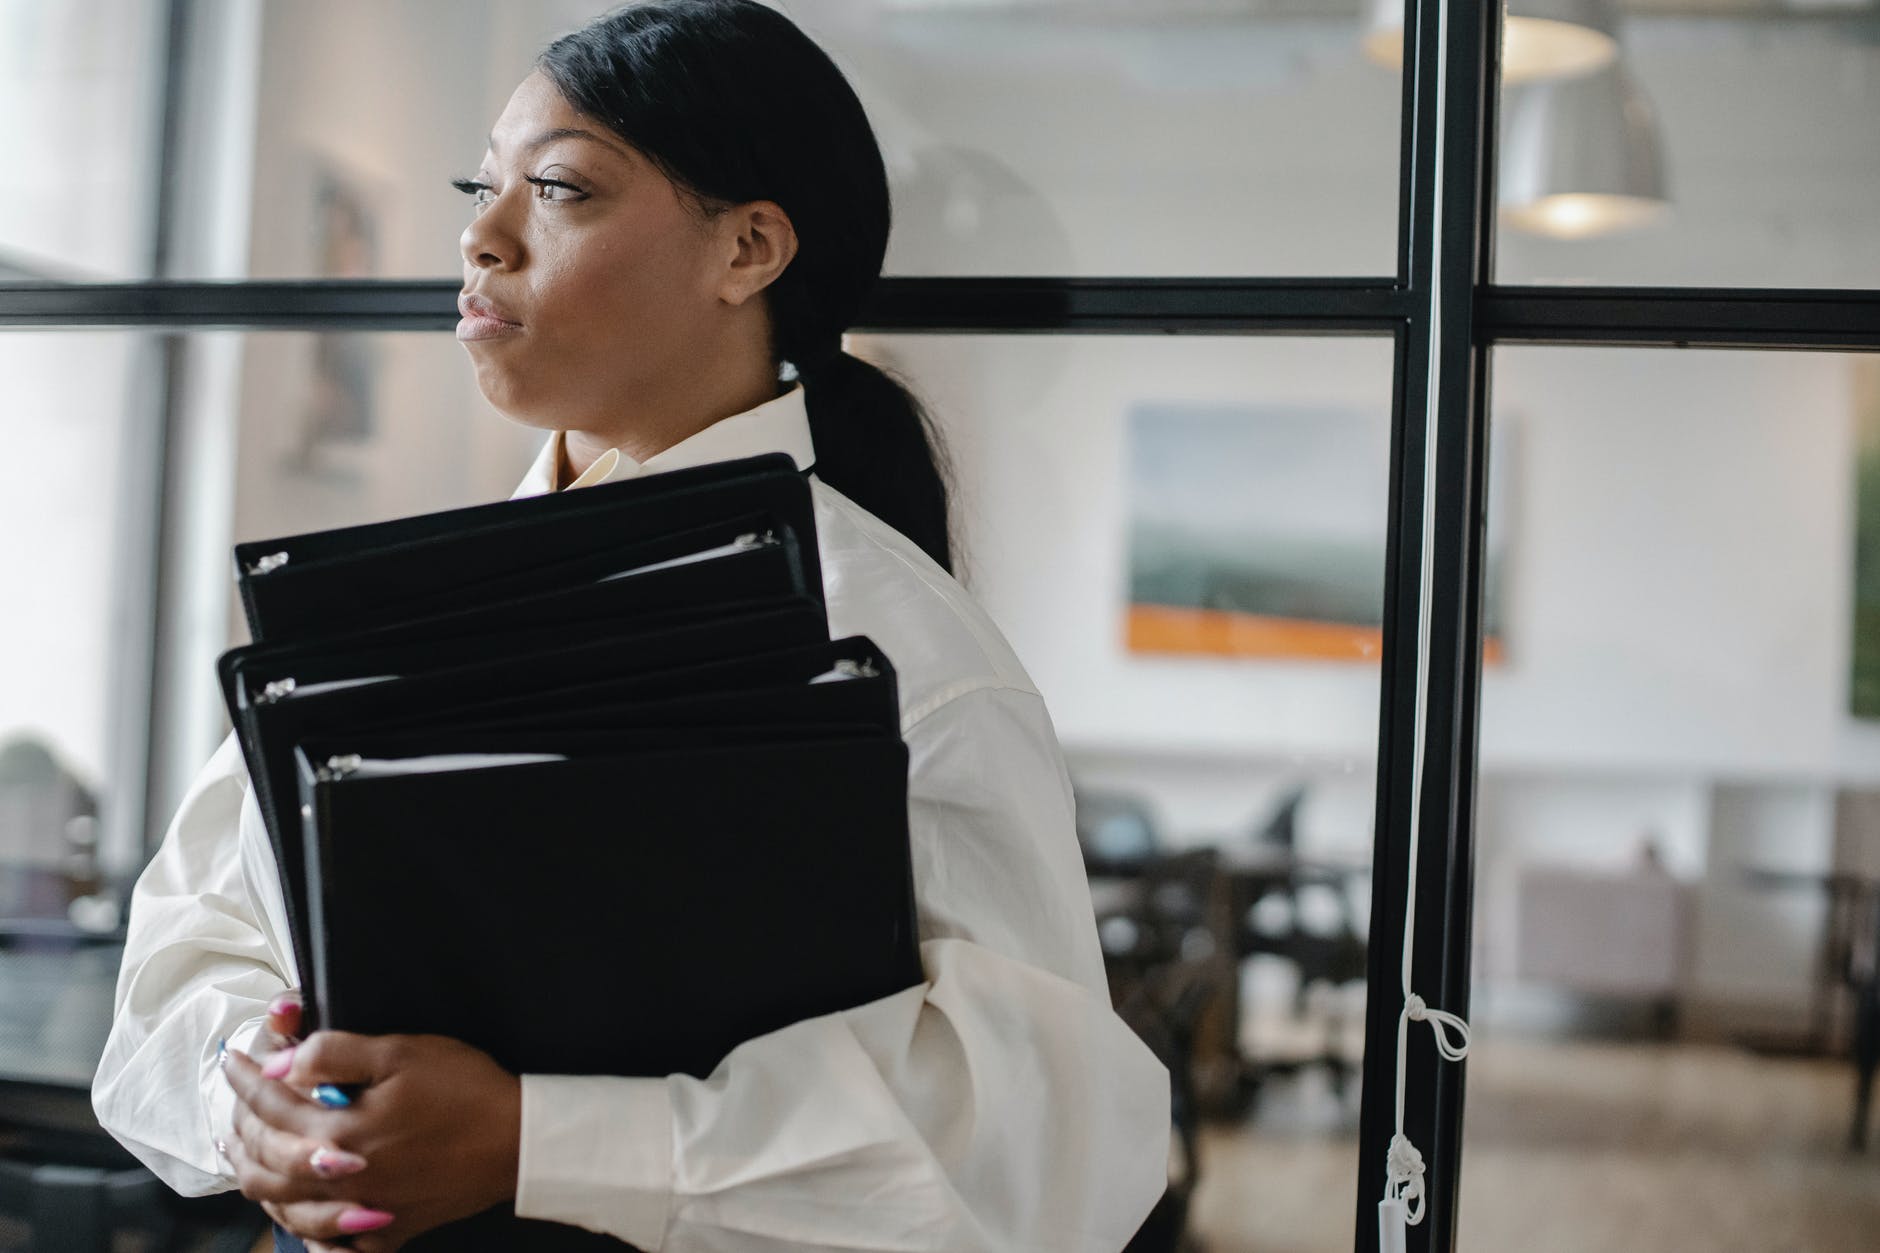 serious black woman carrying documents in office, smart money bro